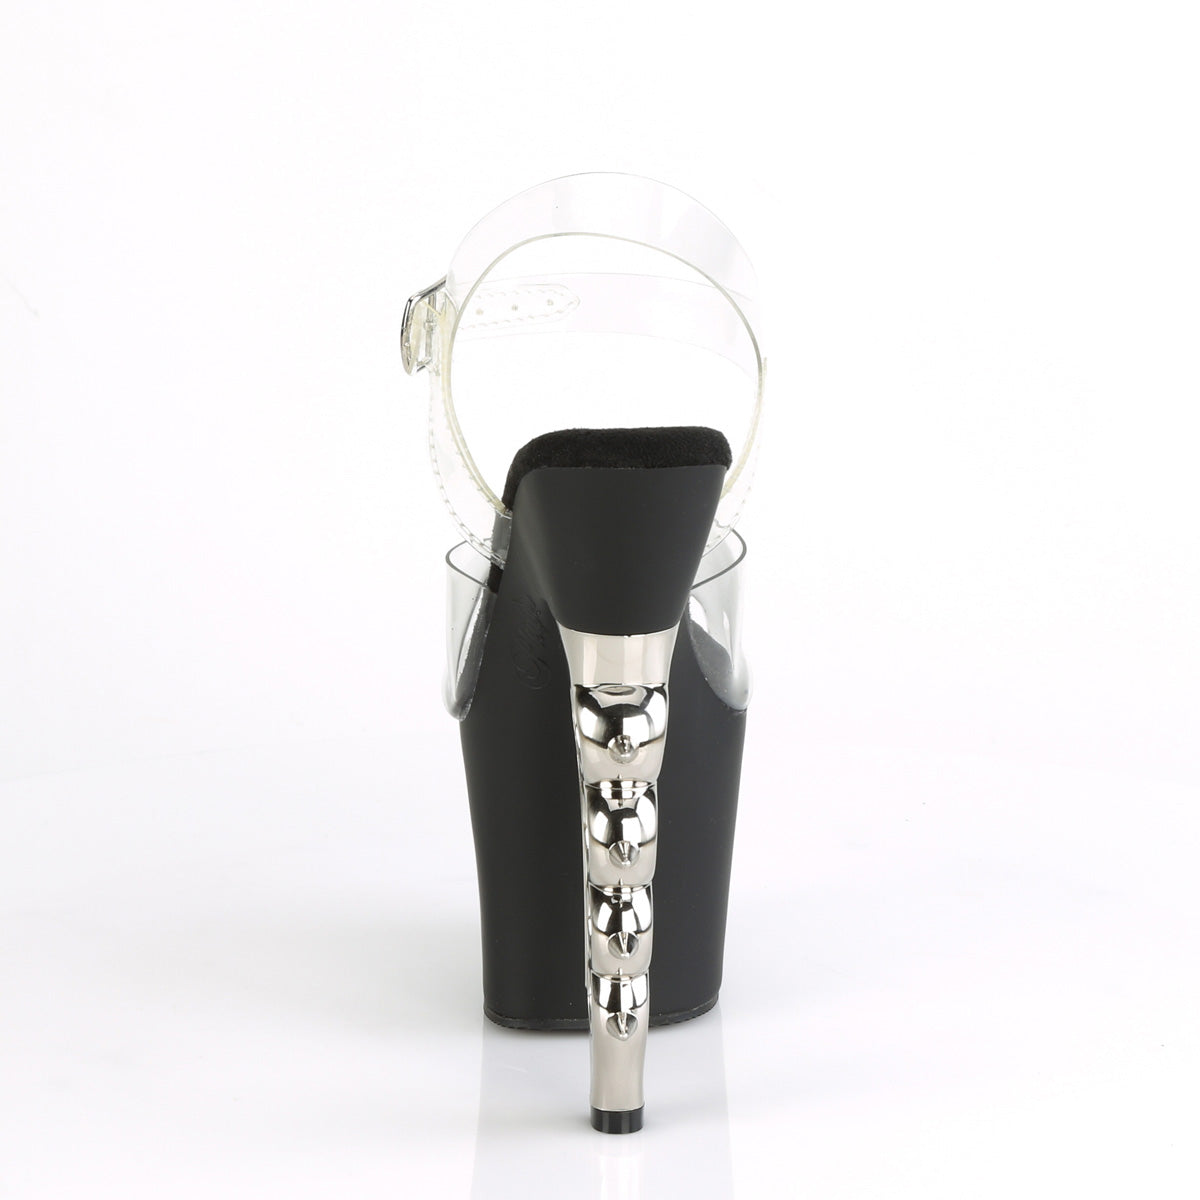 IRONGRIP-708 Pleaser Pole Dancing Shoes 7 Inch Heel Pleasers - Sexy Shoes Fetish Footwear